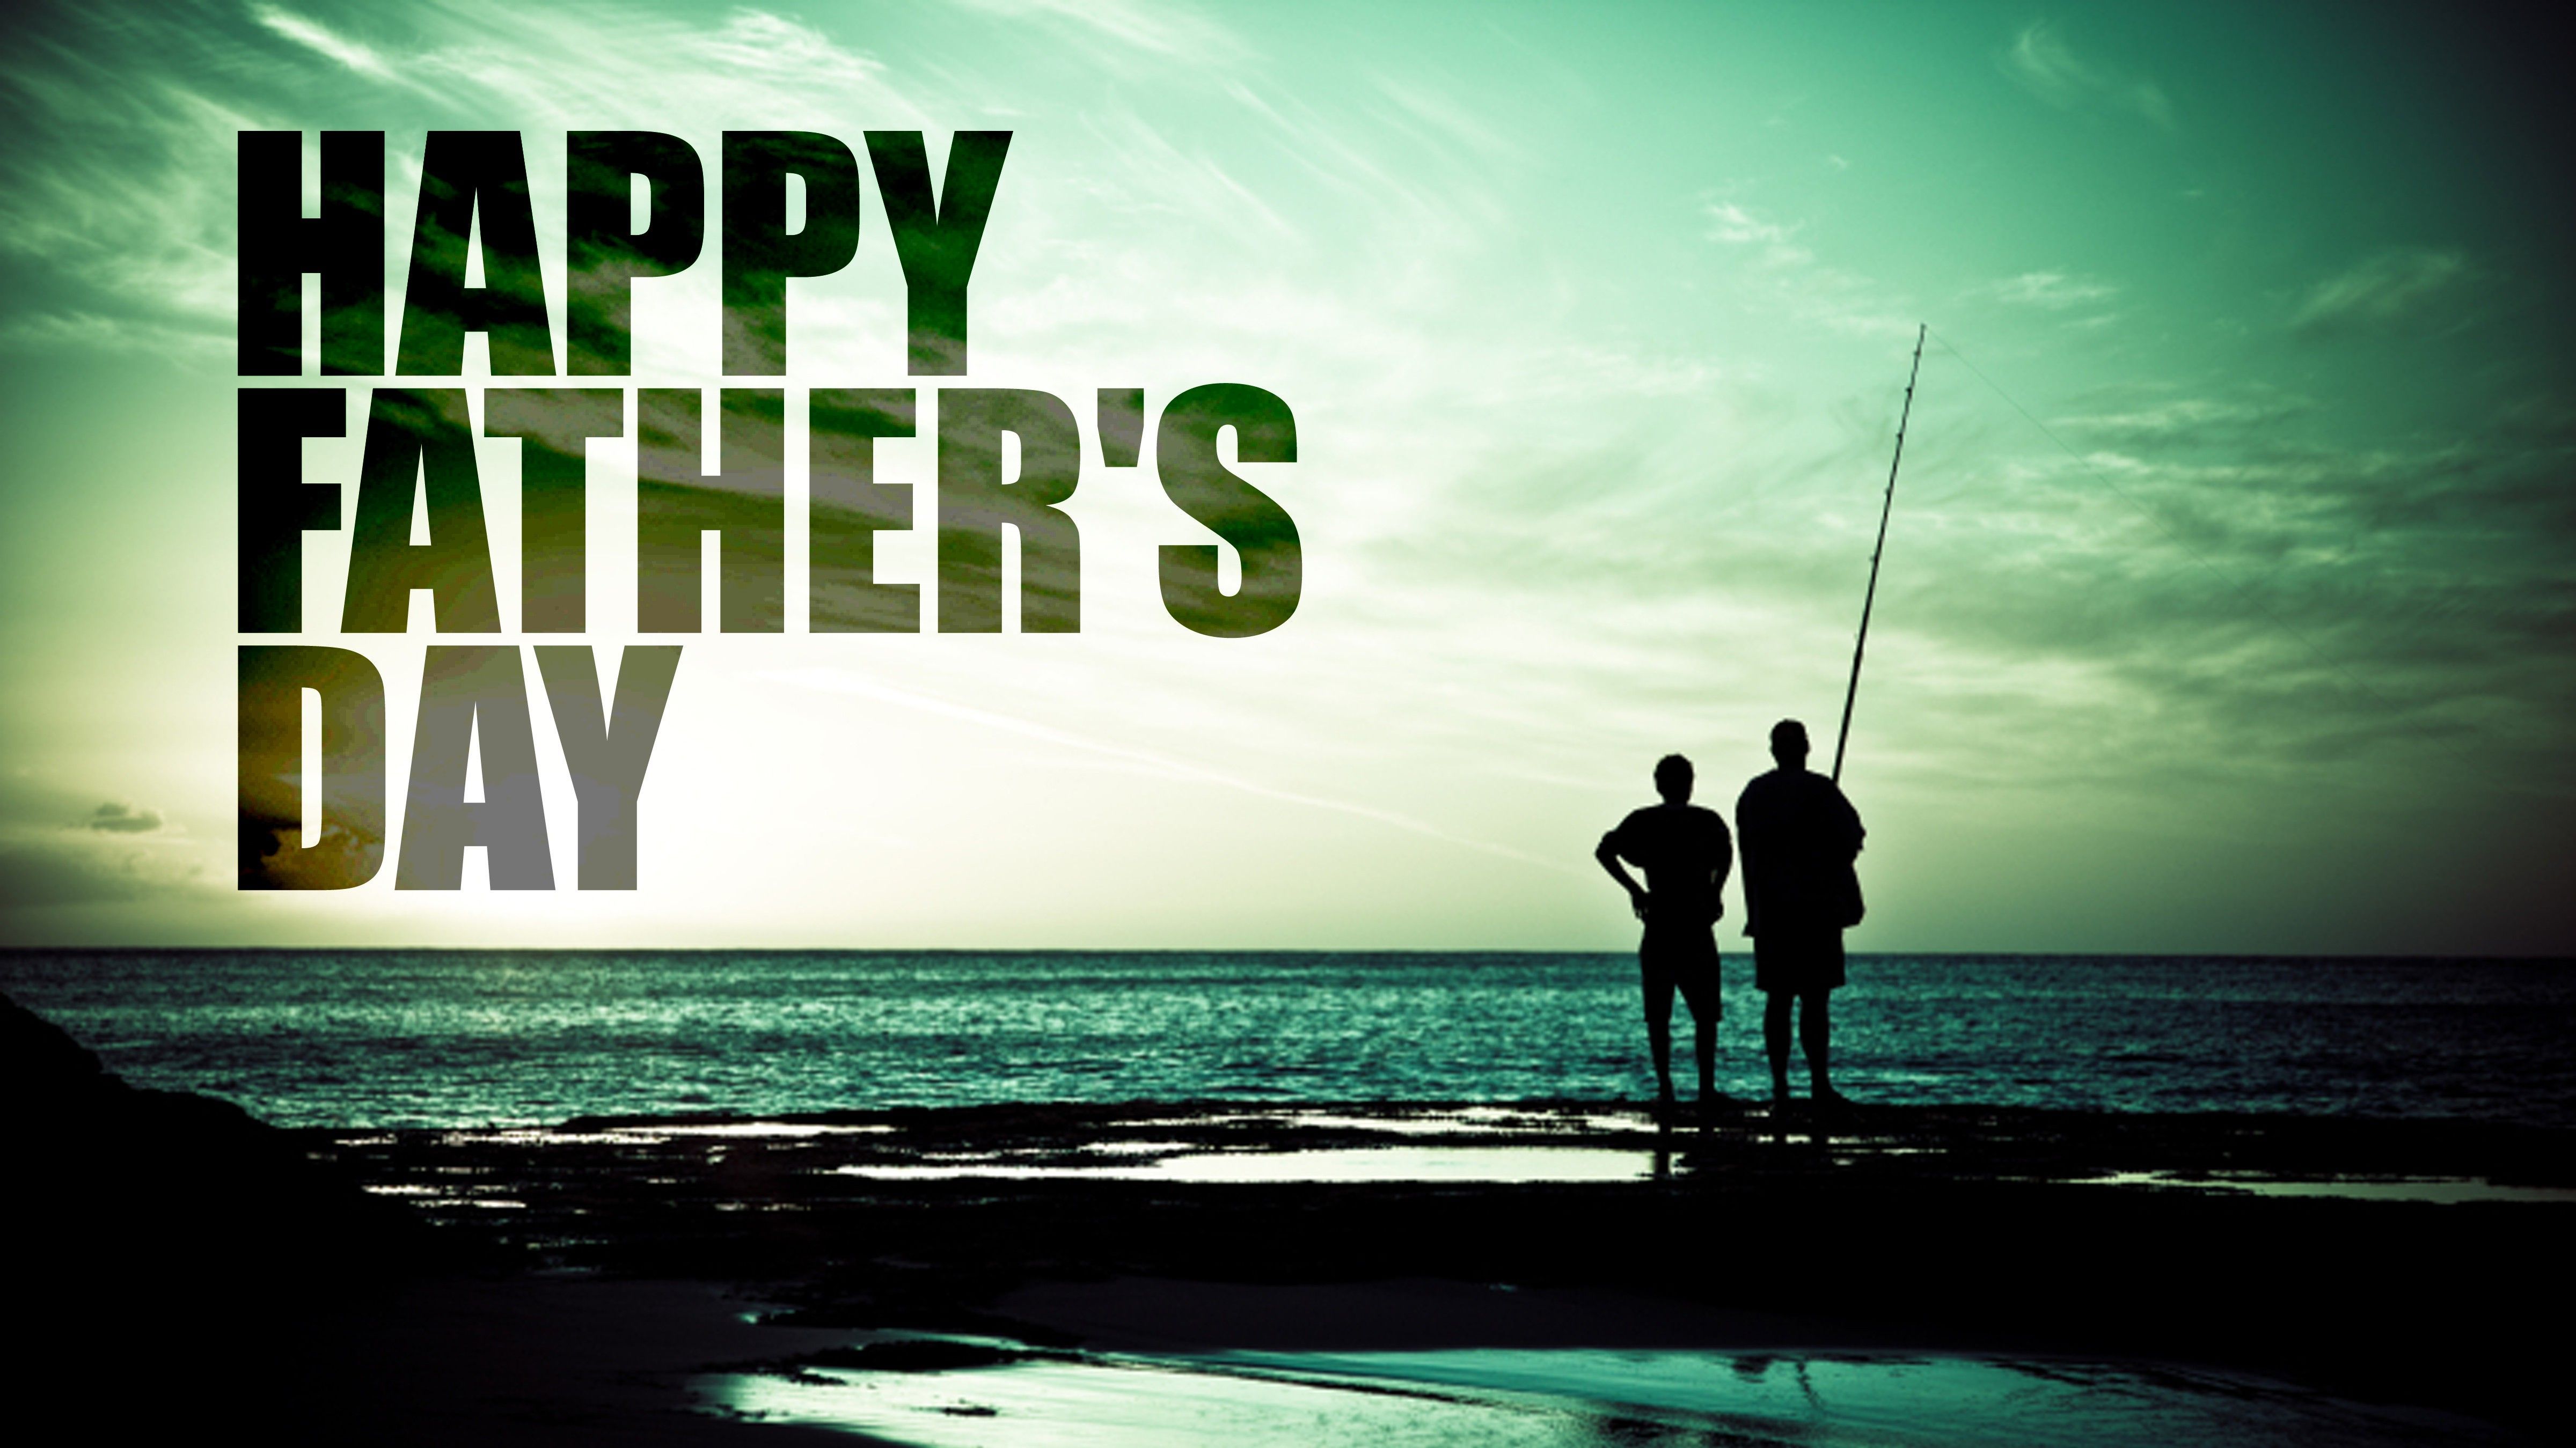 Father's Day 3D Wallpaper Collection. Happy fathers day wallpaper